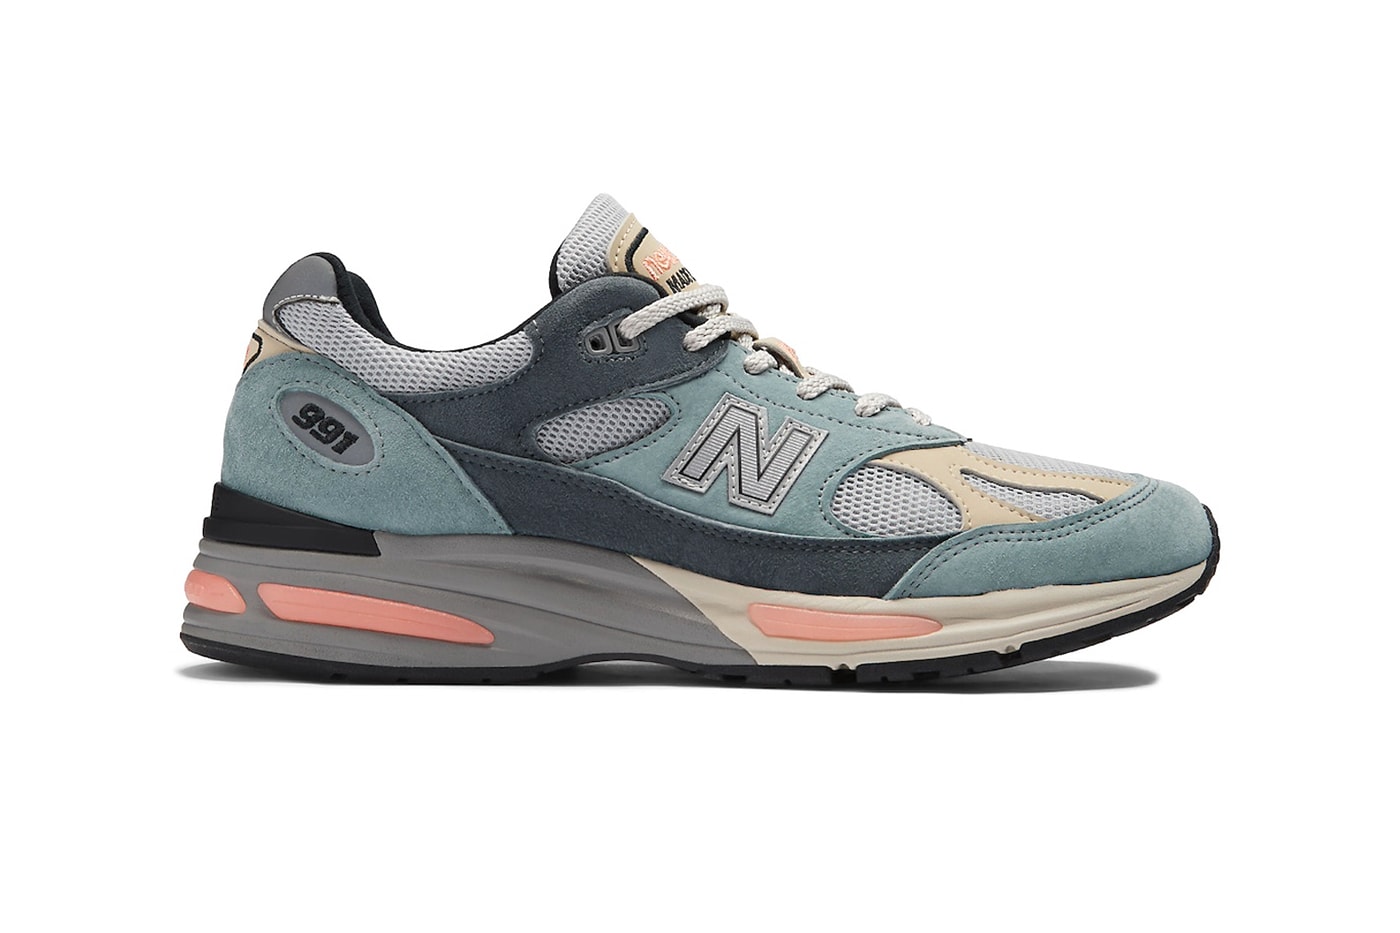 Official Look at the New Balance 991v2 "Silver Blue" U991SG2 Silver Blue/Turbulence-Quiet Grey march 2024 spring running shoe dad shoe leather suede